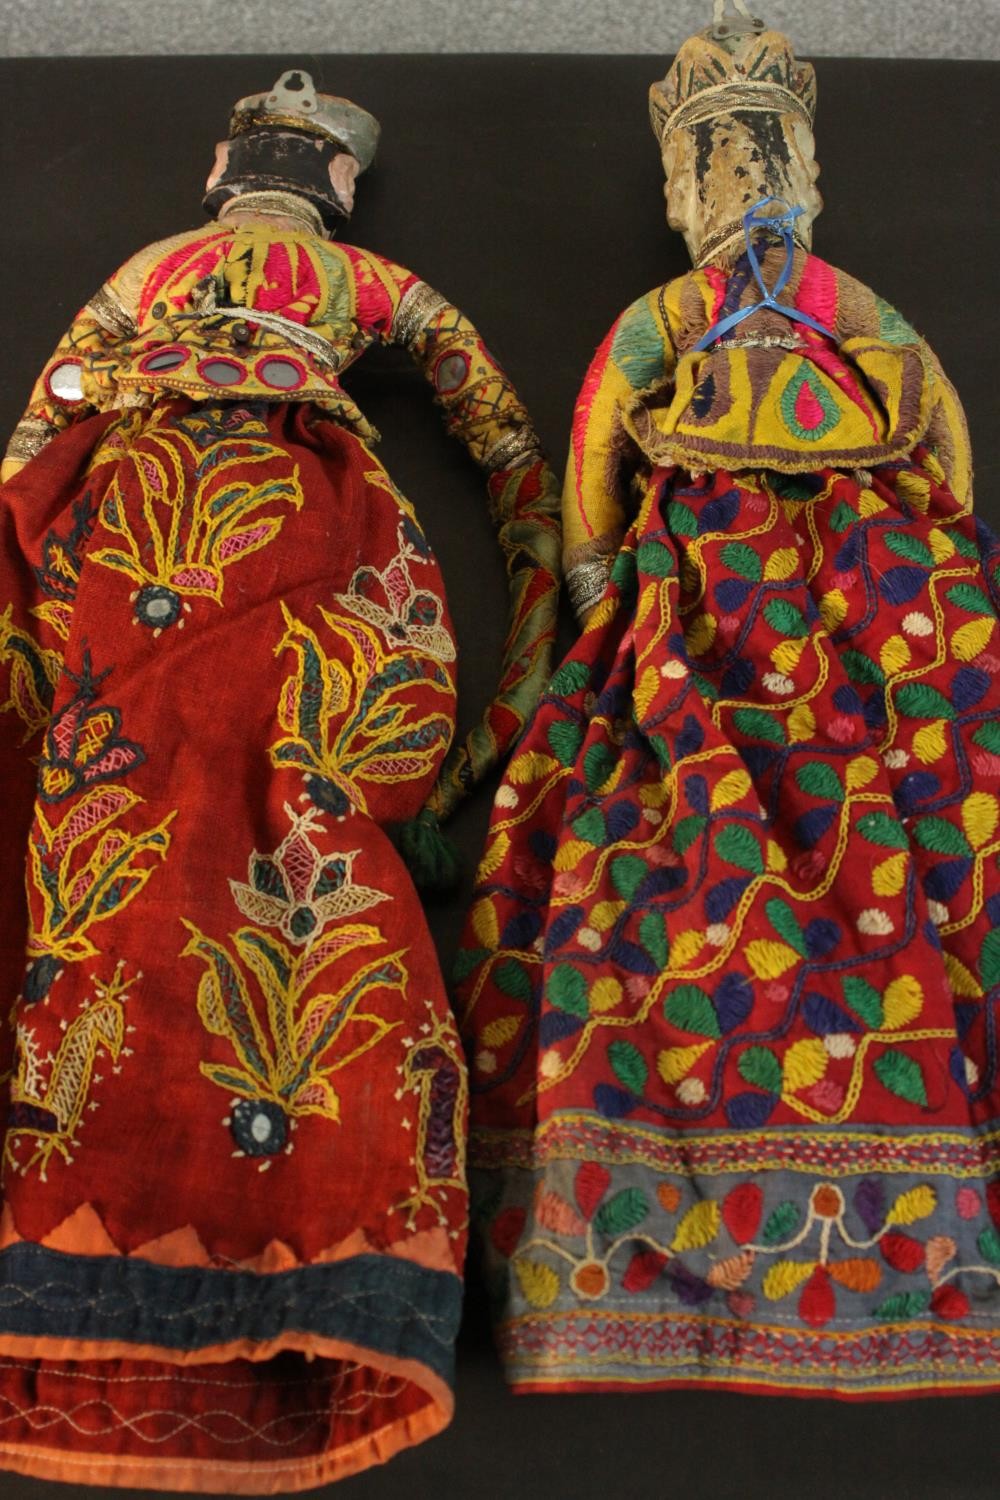 Two 19th century carved and painted Indian dolls in embroidered traditional costumes, the robes with - Image 5 of 12